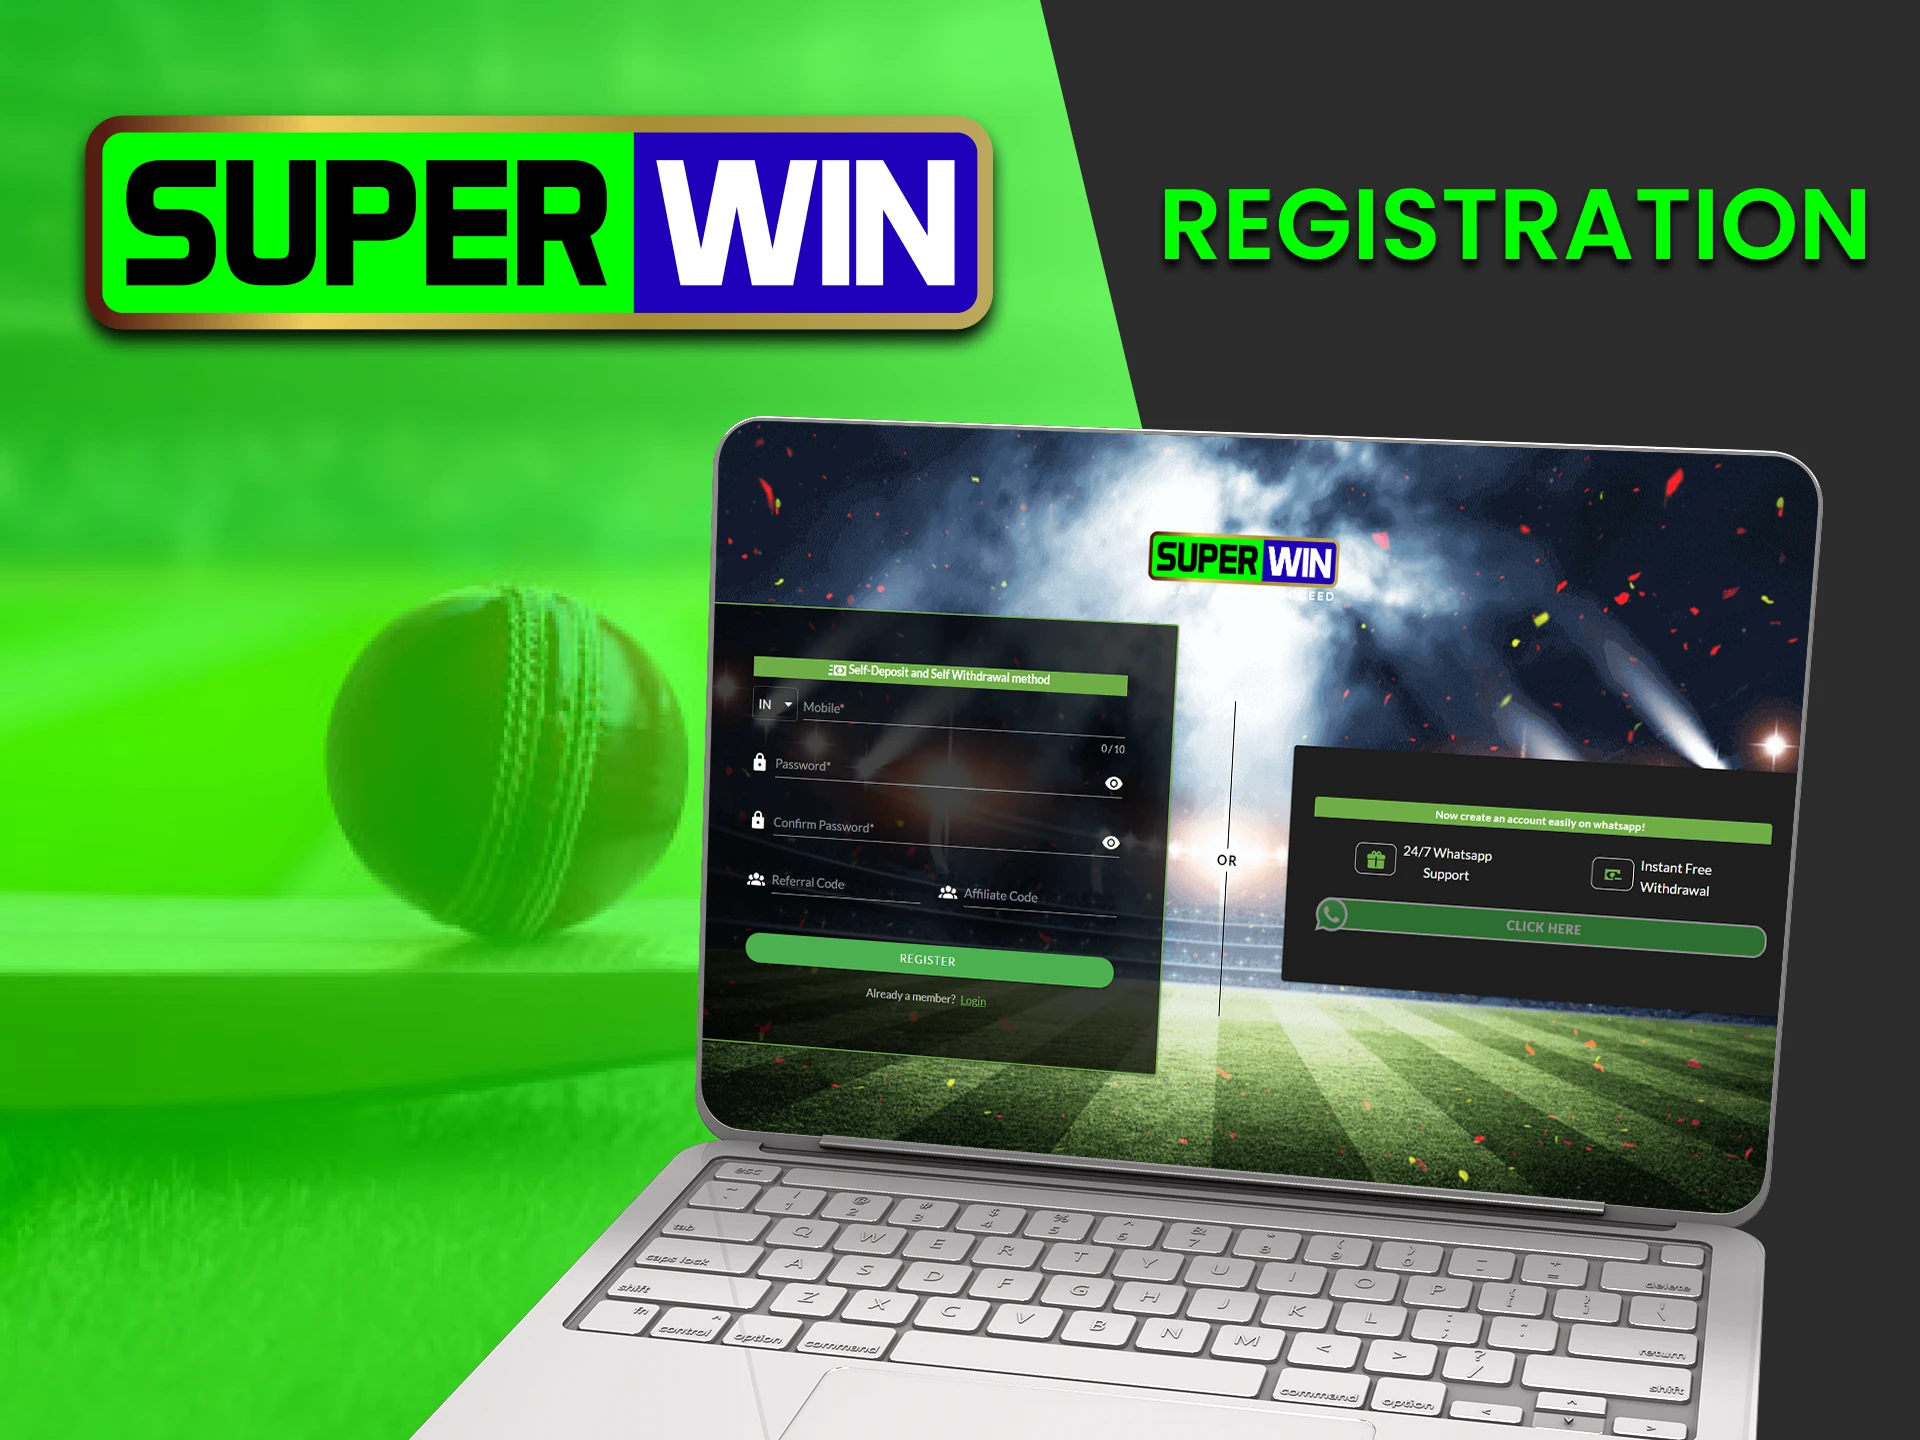 Register on the Superwin service for betting.